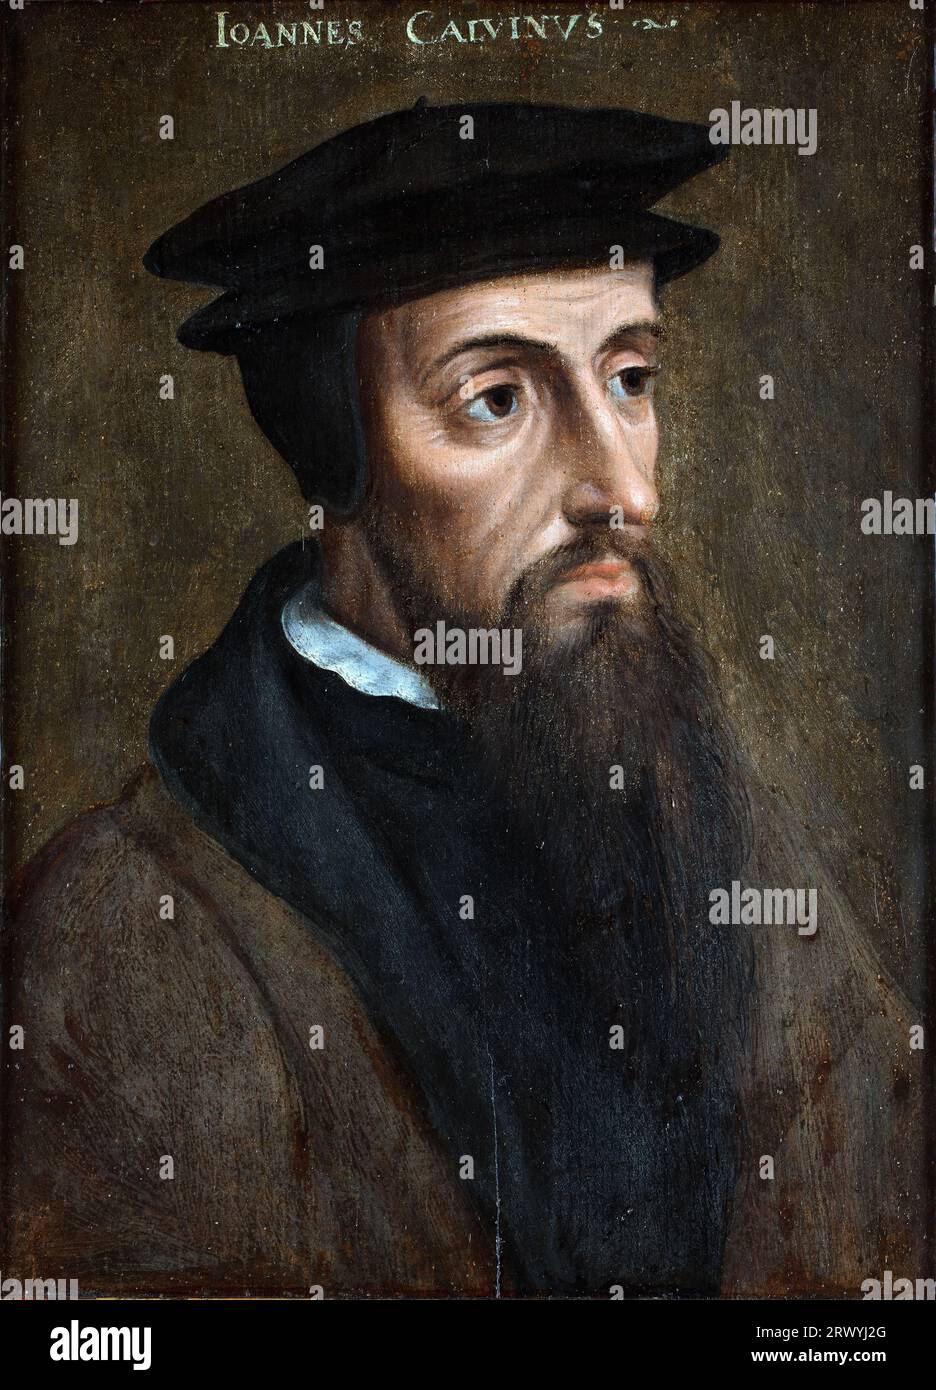 John Calvin (1509 – 1564) French theologian, pastor and reformer in Geneva during the Protestant Reformation. Stock Photo